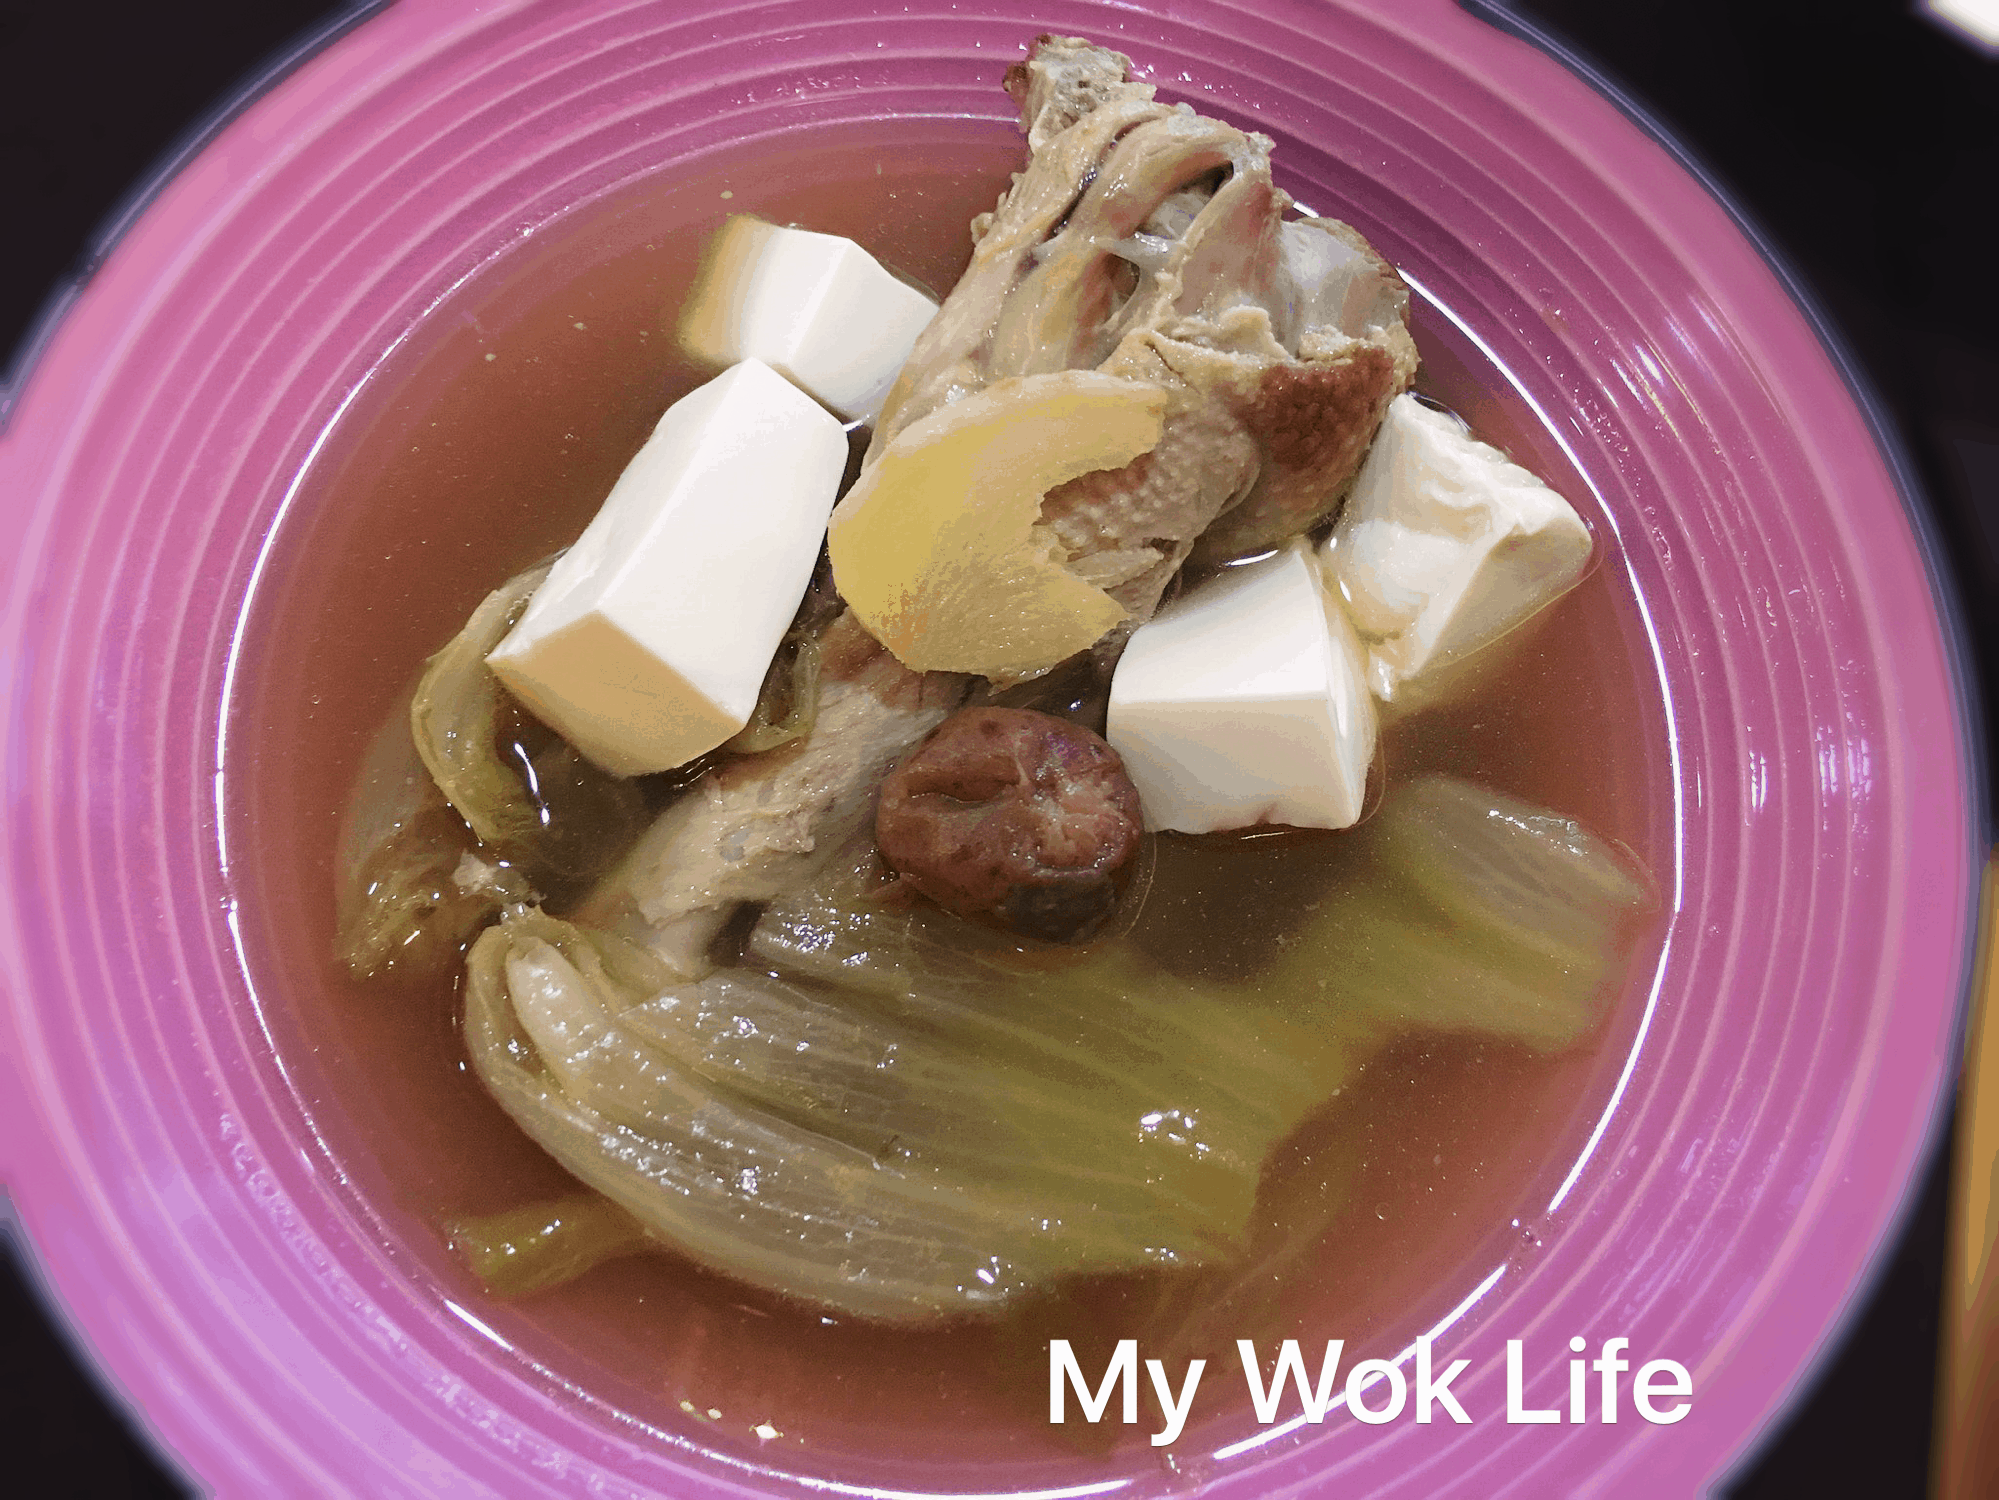 My Wok Life Cooking Blog - Duck Soup with Salted Vegetable & Tofu (咸菜豆腐鸭汤) -